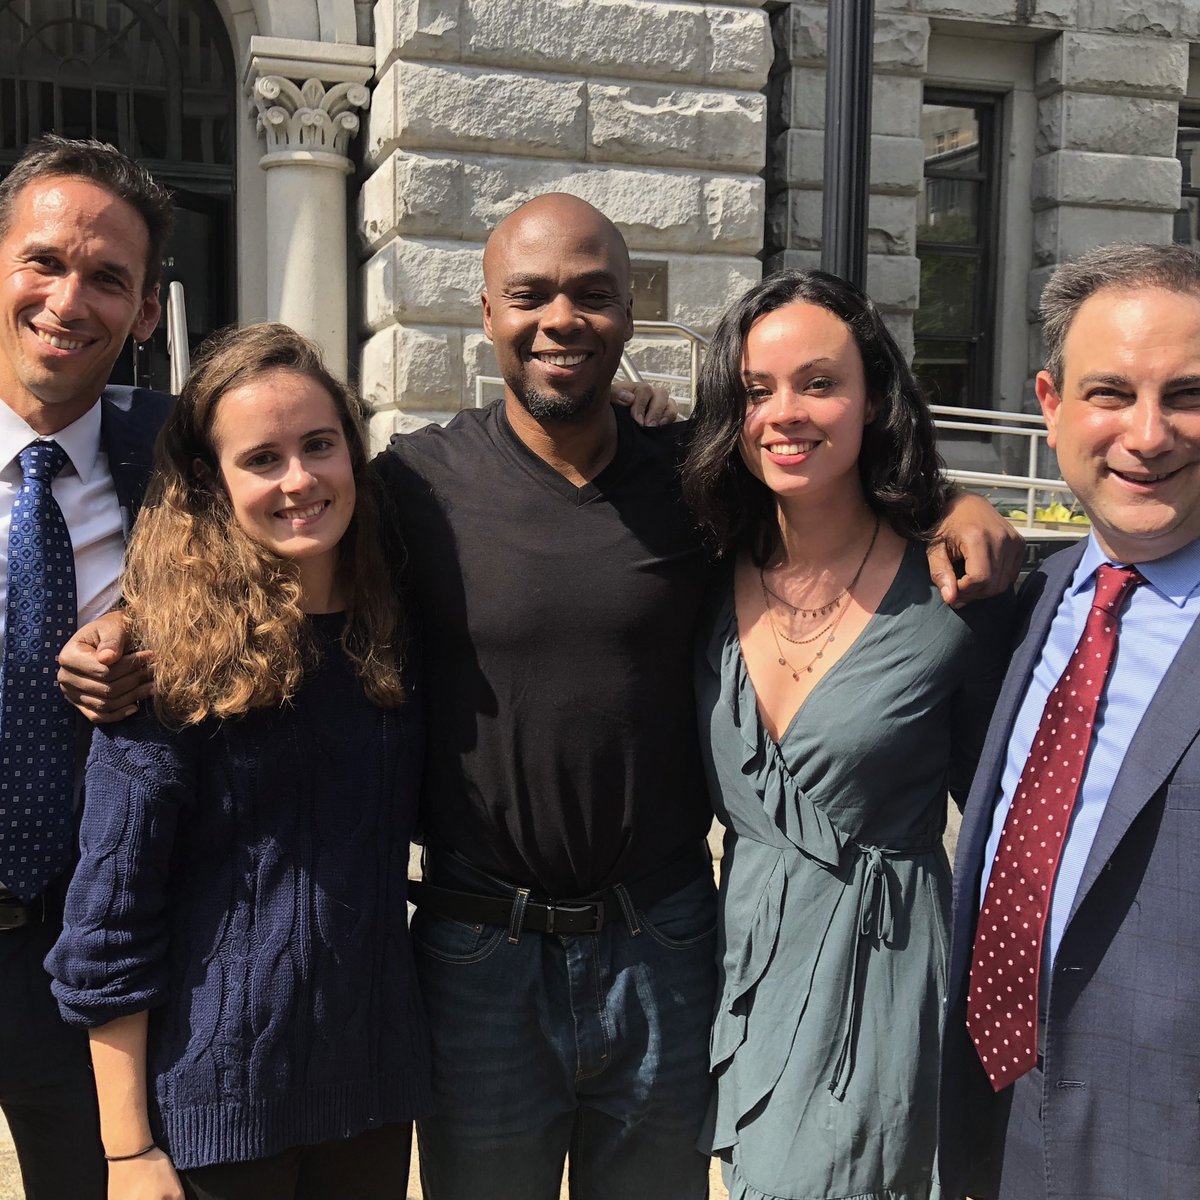 Oct. 2 is #wrongfulconvictionday. Today we celebrate the 7 amazing people — who served a combined 187 years in prison — that the #MakinganExoneree program has welcomed home, and we acknowledge those who are still fighting for their freedom. They motivate and inspire us everyday.